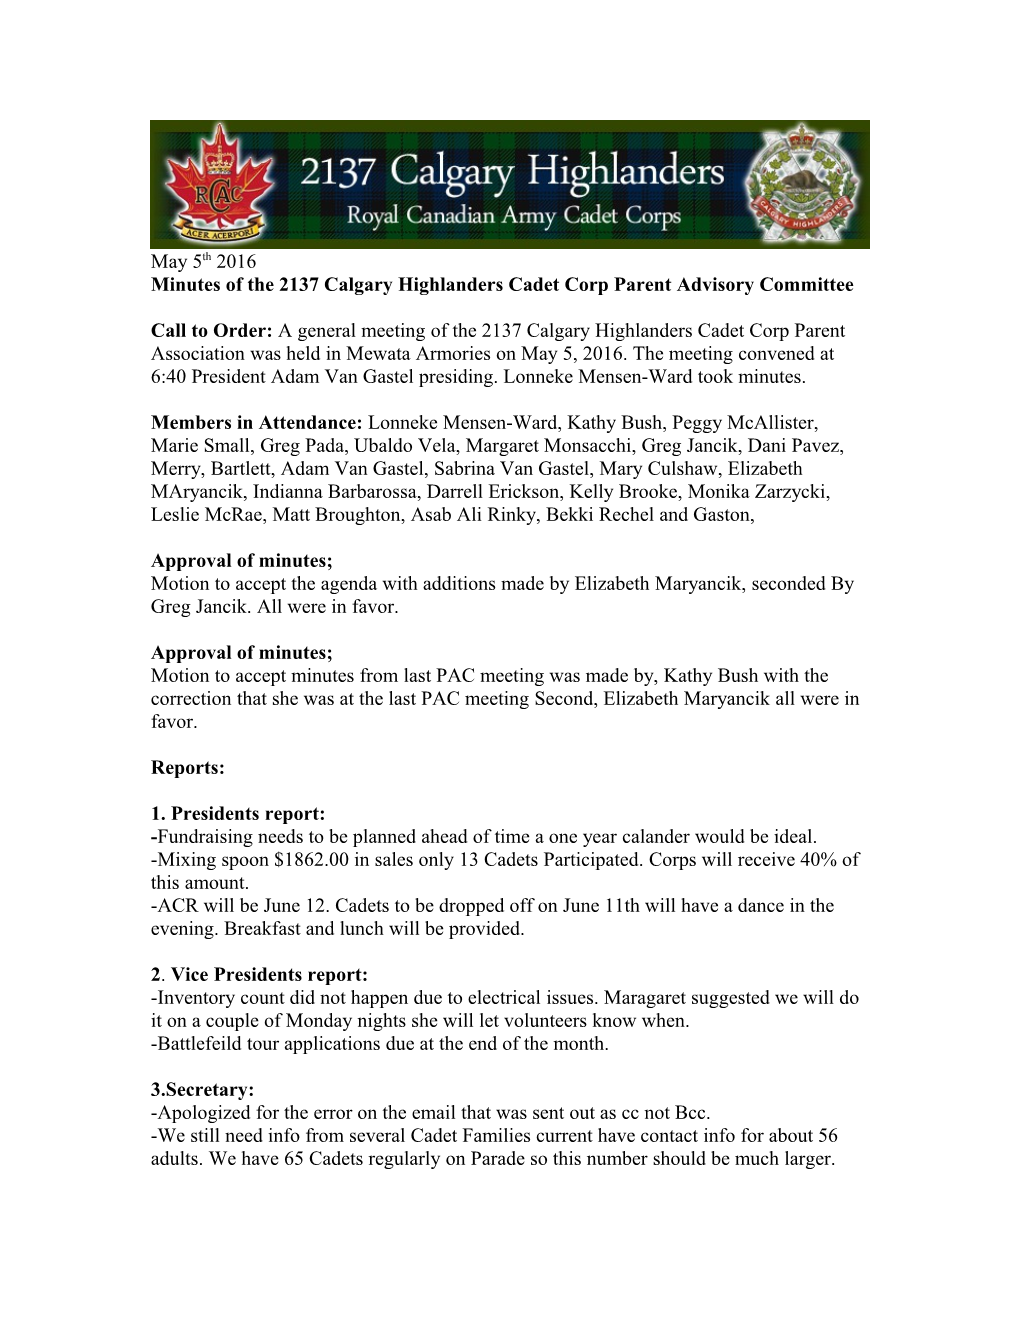 Minutes of the 2137 Calgary Highlanders Cadet Corp Parent Advisory Committee